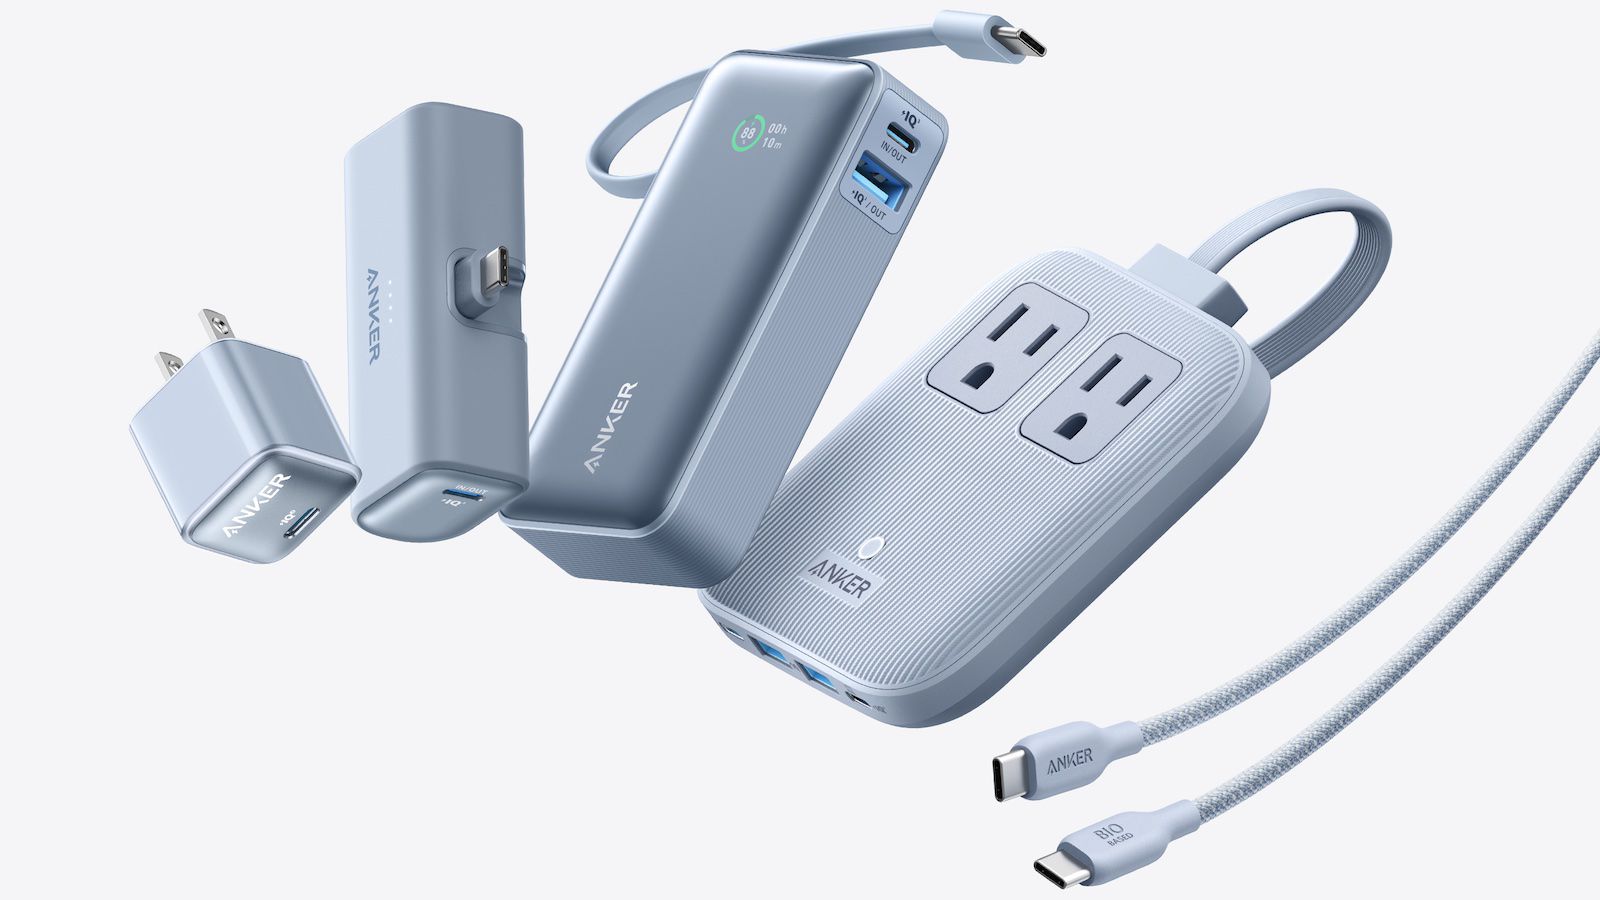 Belkin Launches New MagSafe Charger With Kickstand - MacRumors